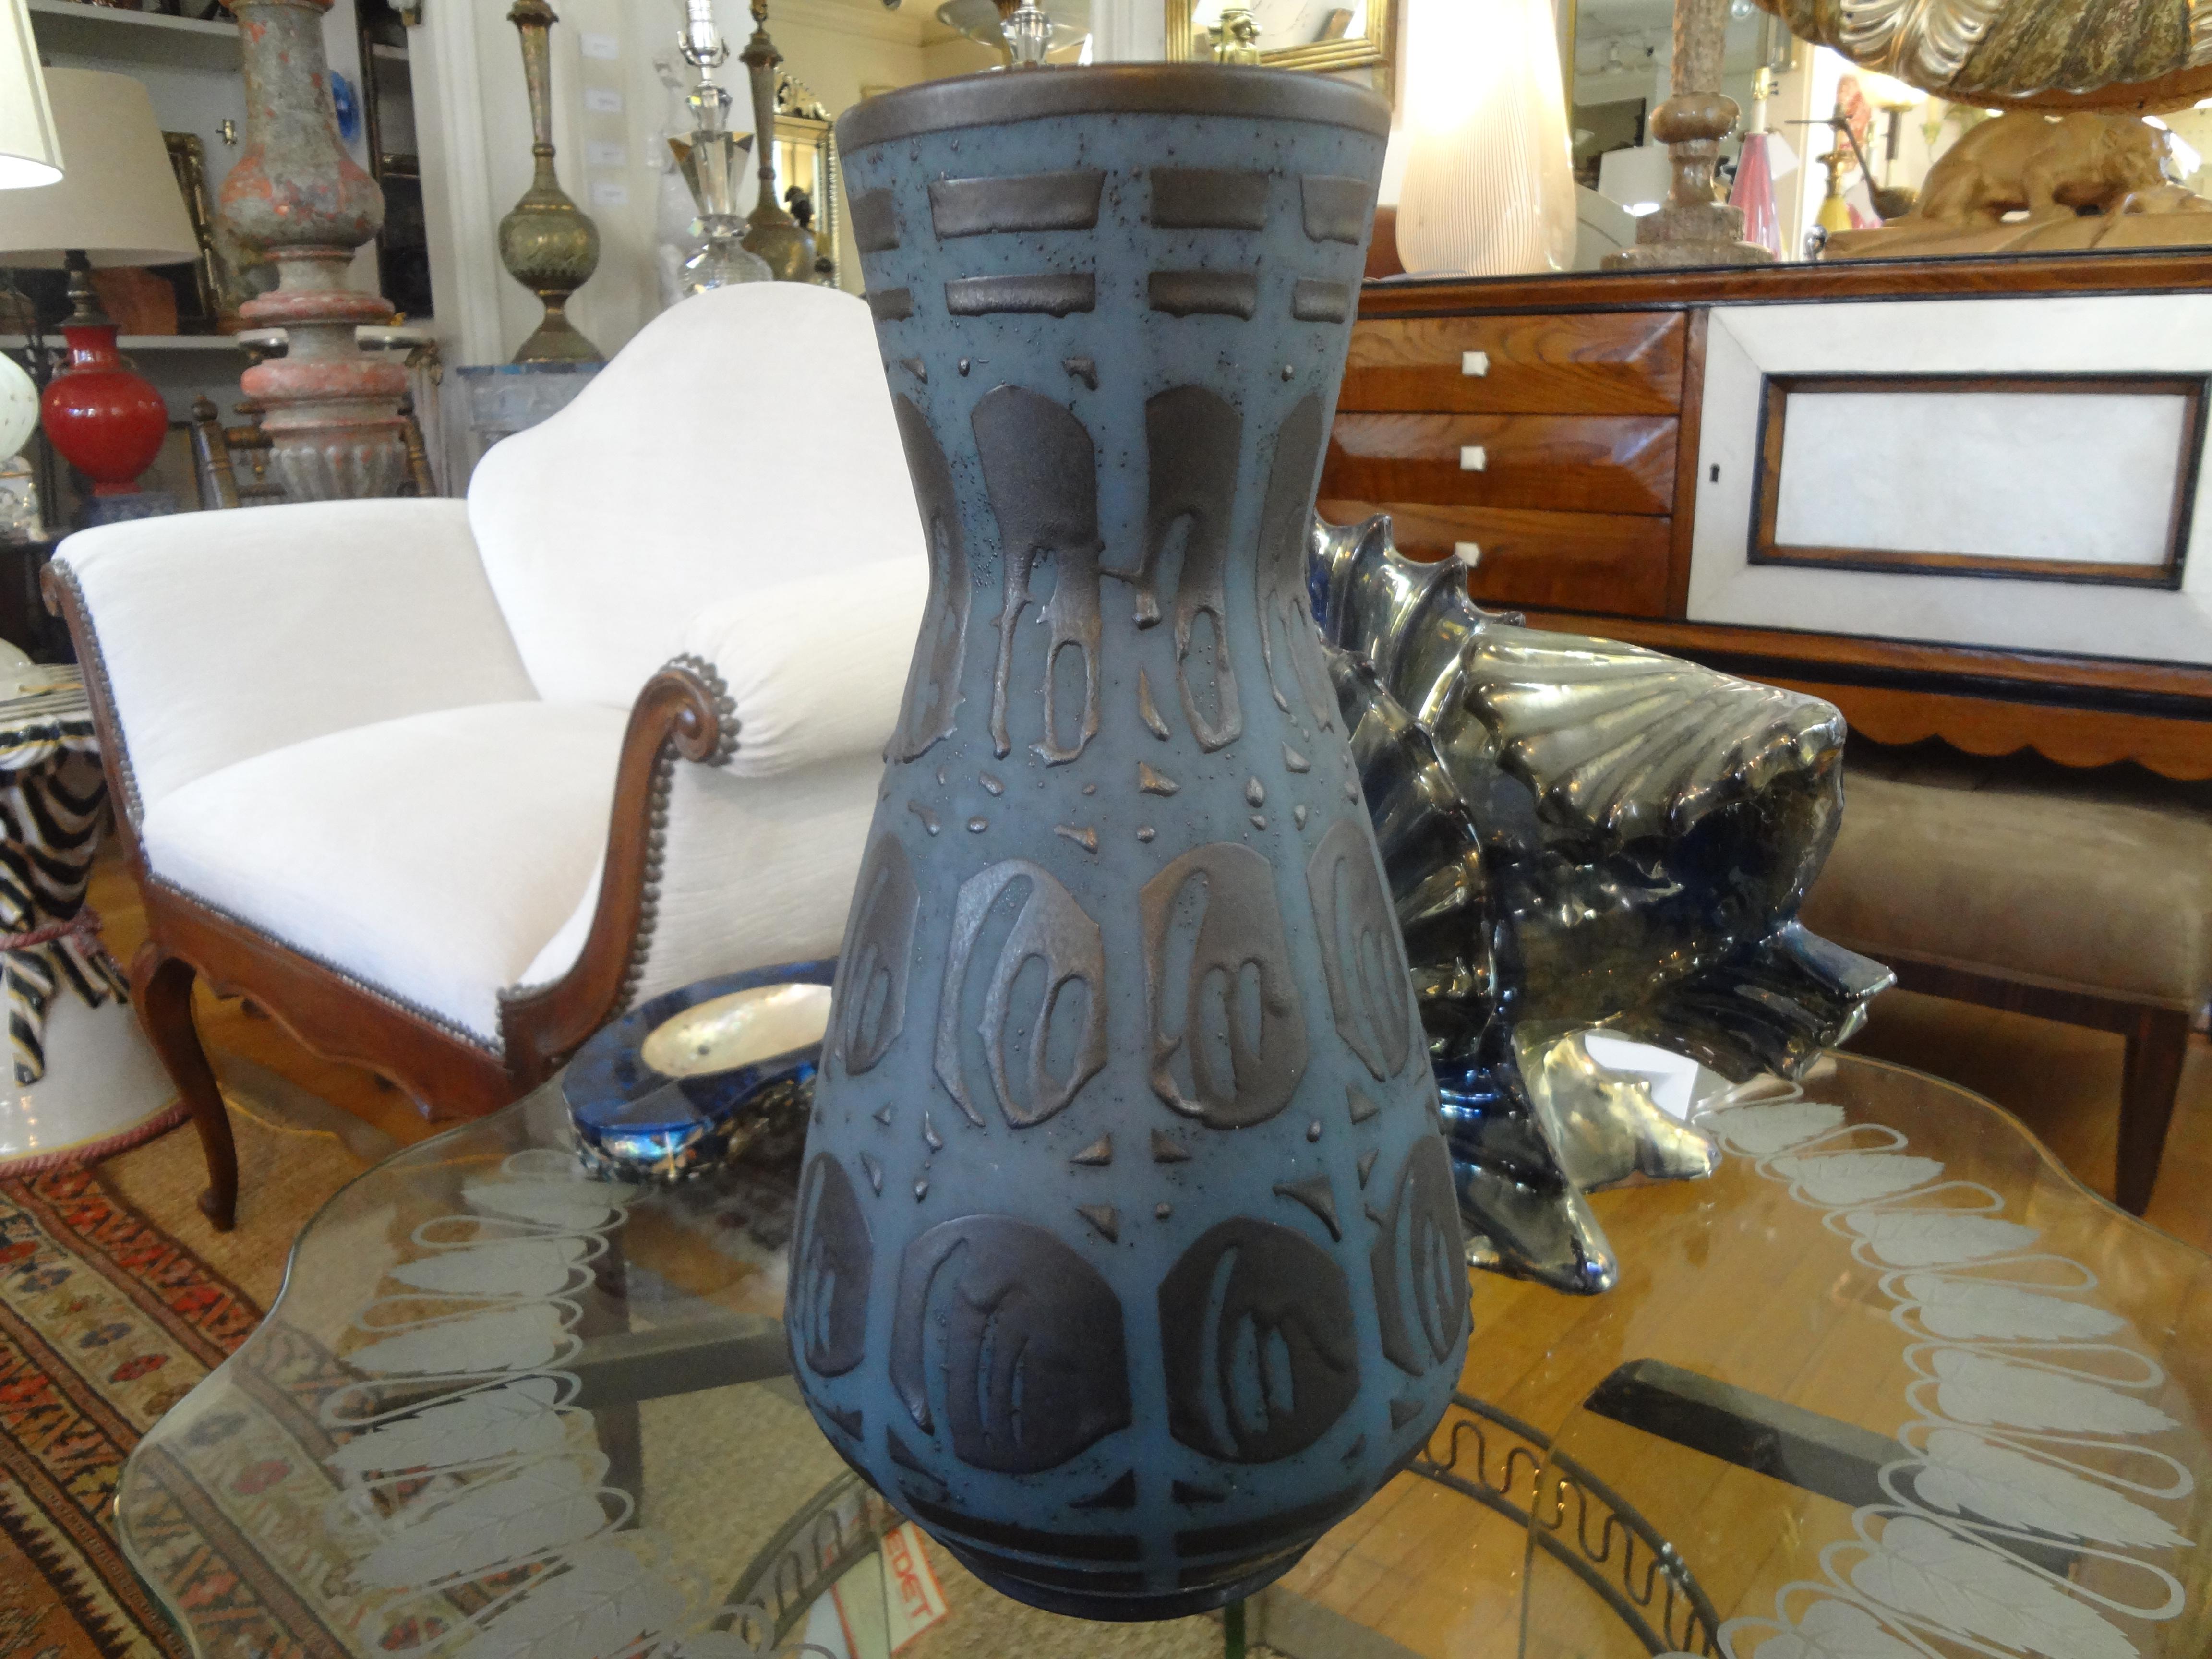 Stunning large midcentury West German matte glazed ceramic vase. This handsome vase has the most interesting geometric design in black over a beautiful steel blue. Just one of our large collection!